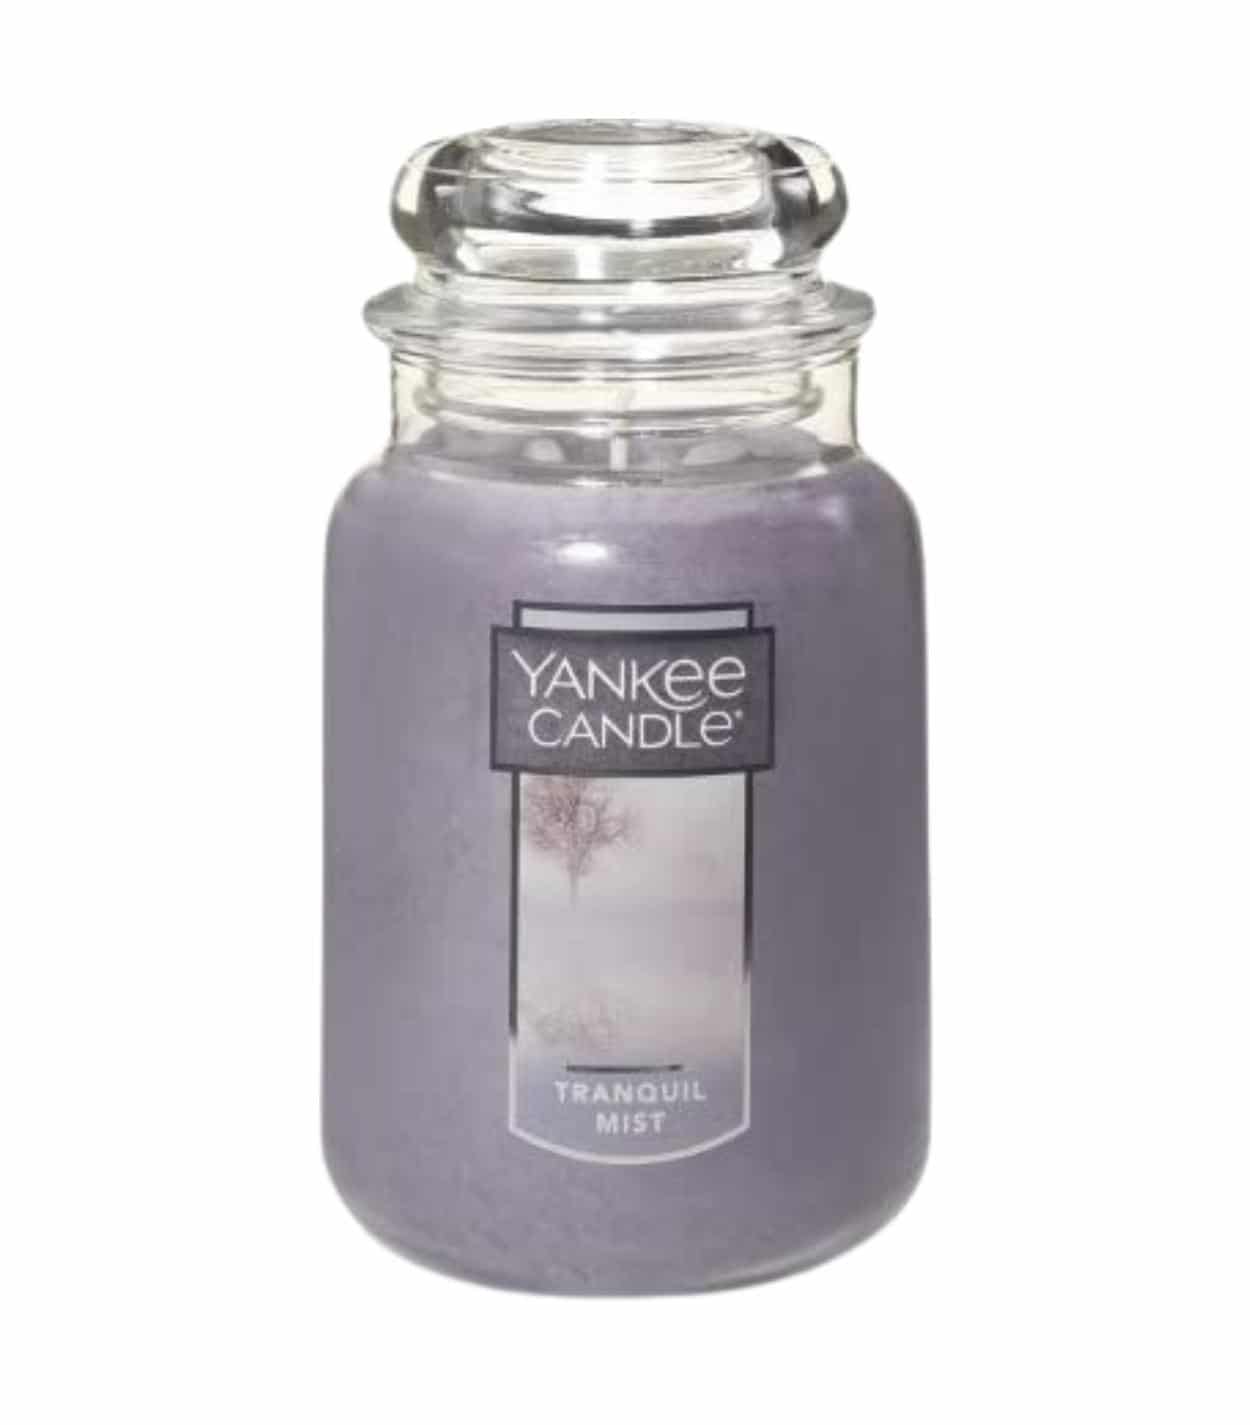 Best Yankee Candle Scents - FragranceReview.com